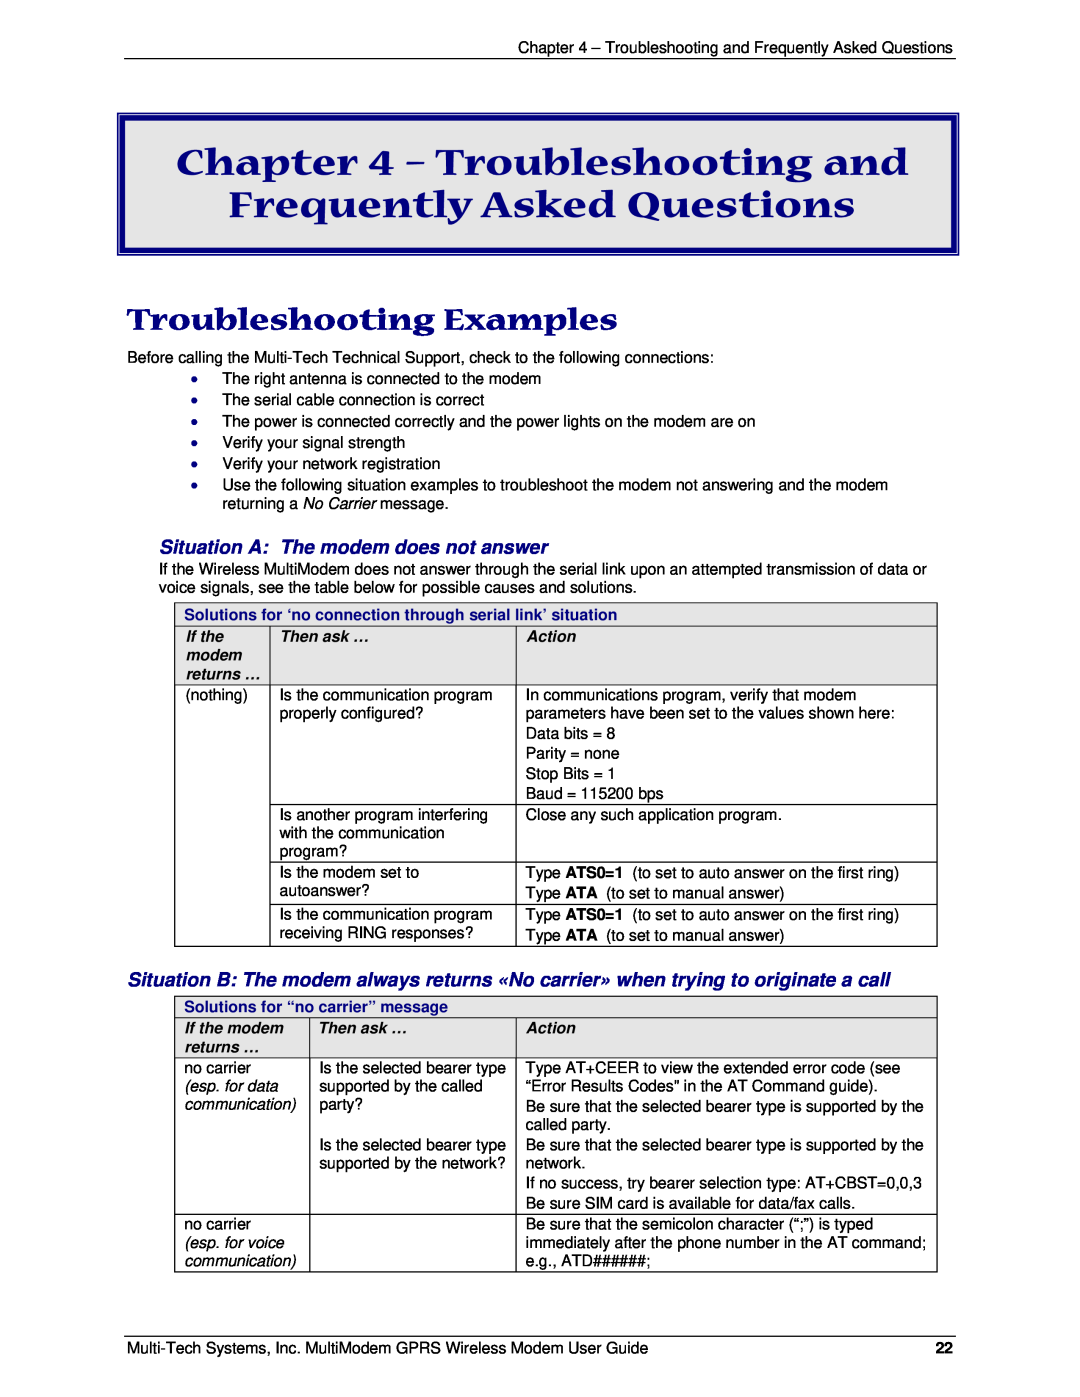 Multi-Tech Systems MTCBA-G-F4 Troubleshooting and Frequently Asked Questions, Troubleshooting Examples, If the, Then ask … 